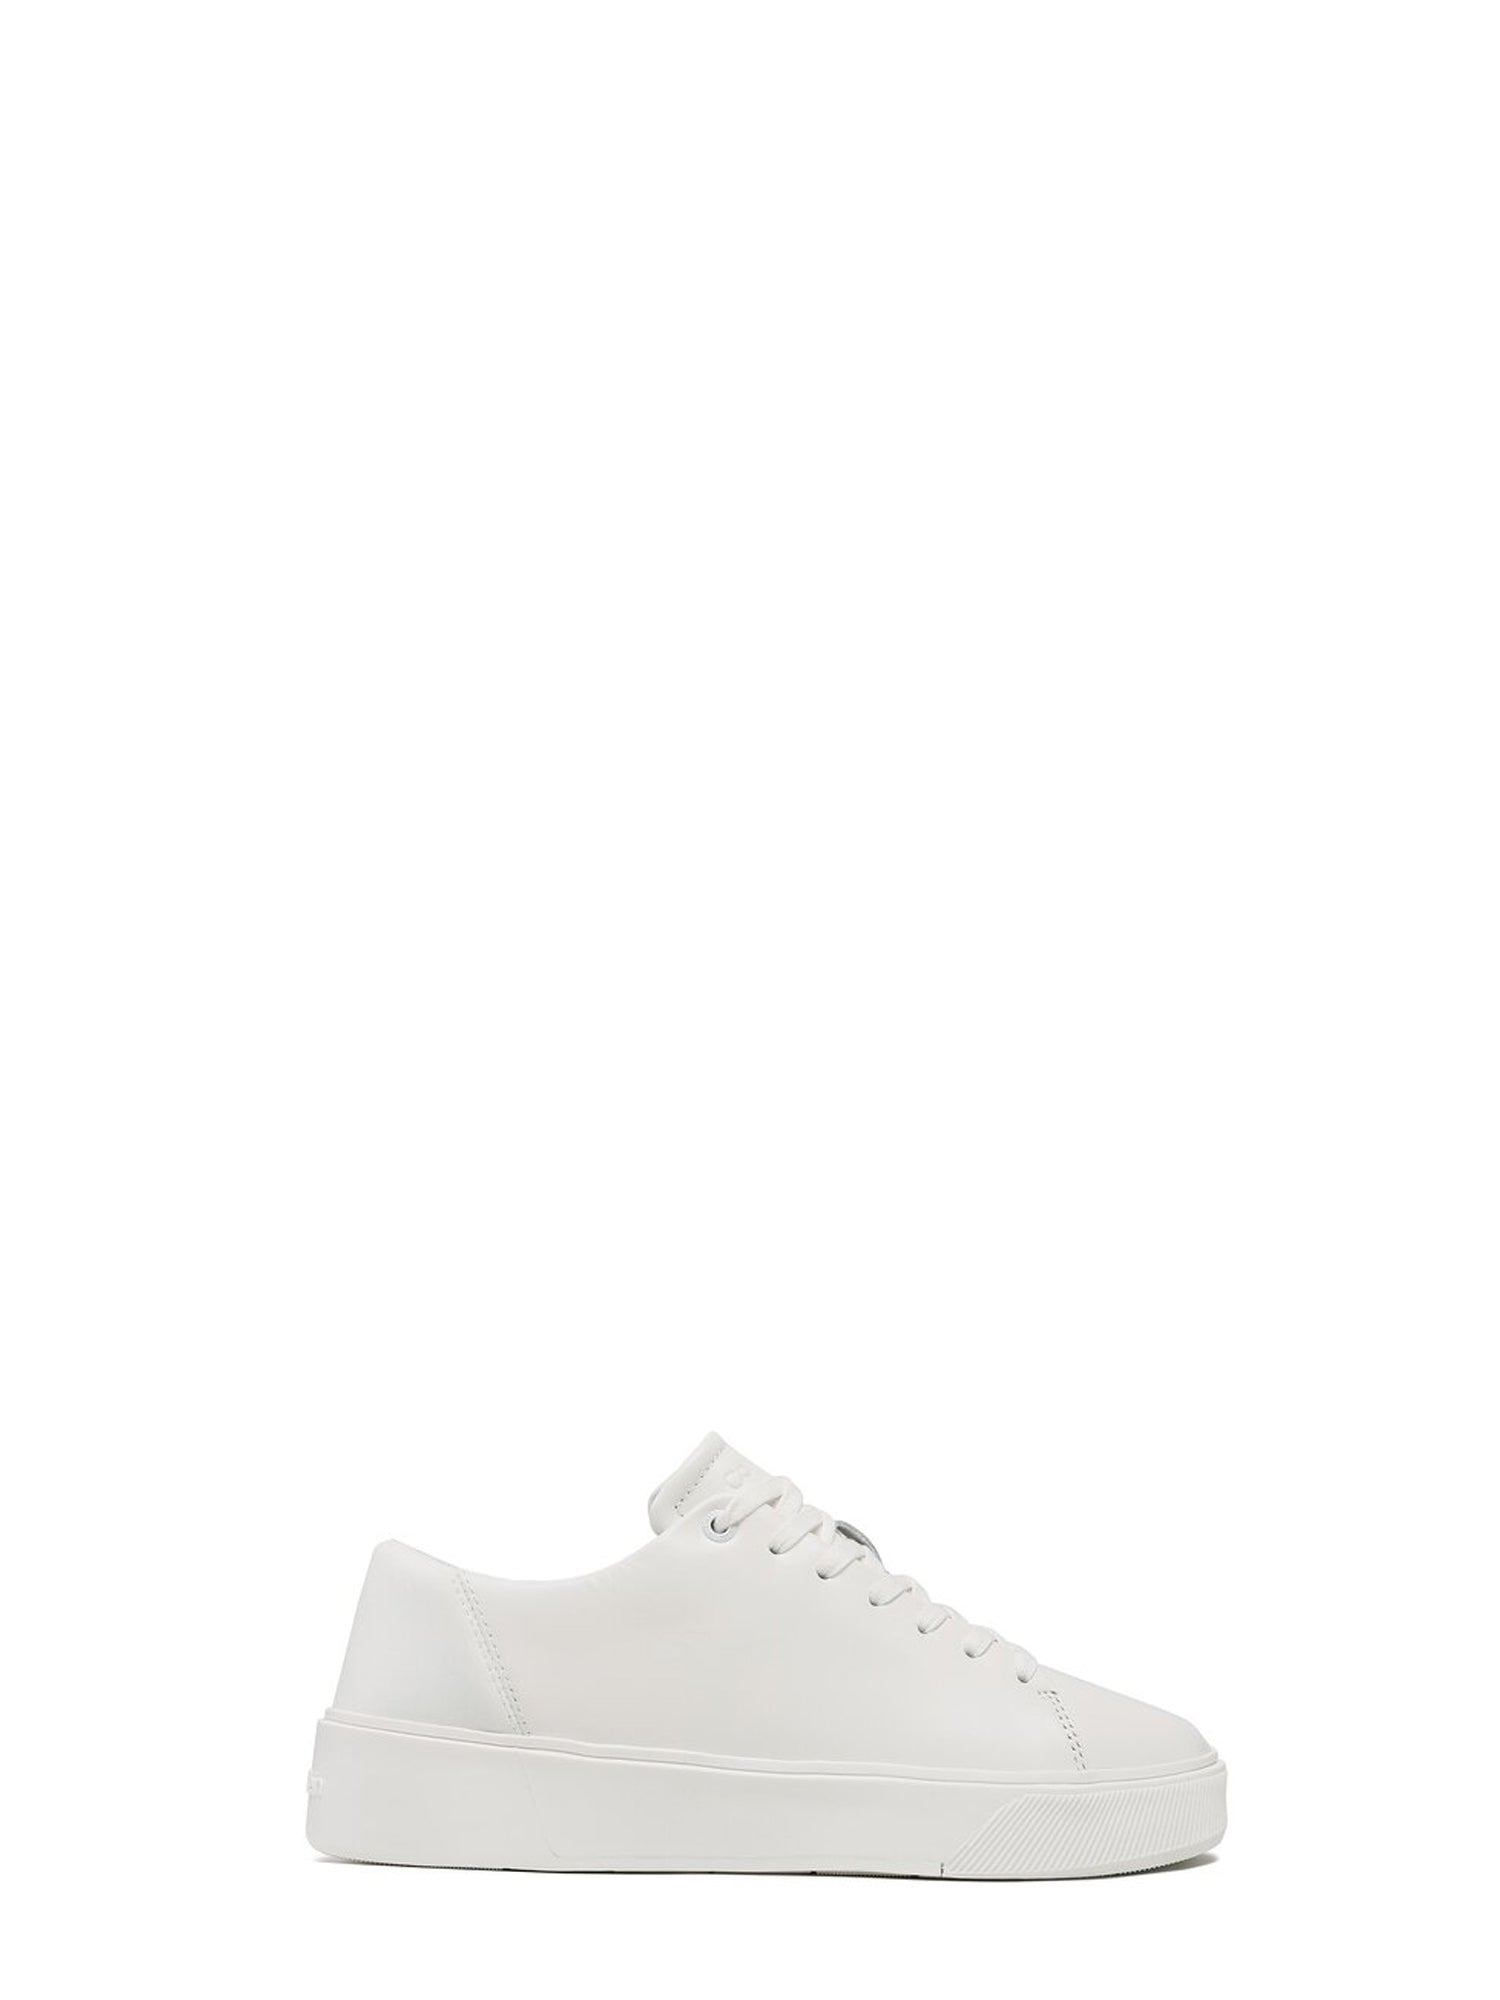 CALVIN KLEIN SHOES SNEAKERS LOW TOP LACE UP LTH BIANCO